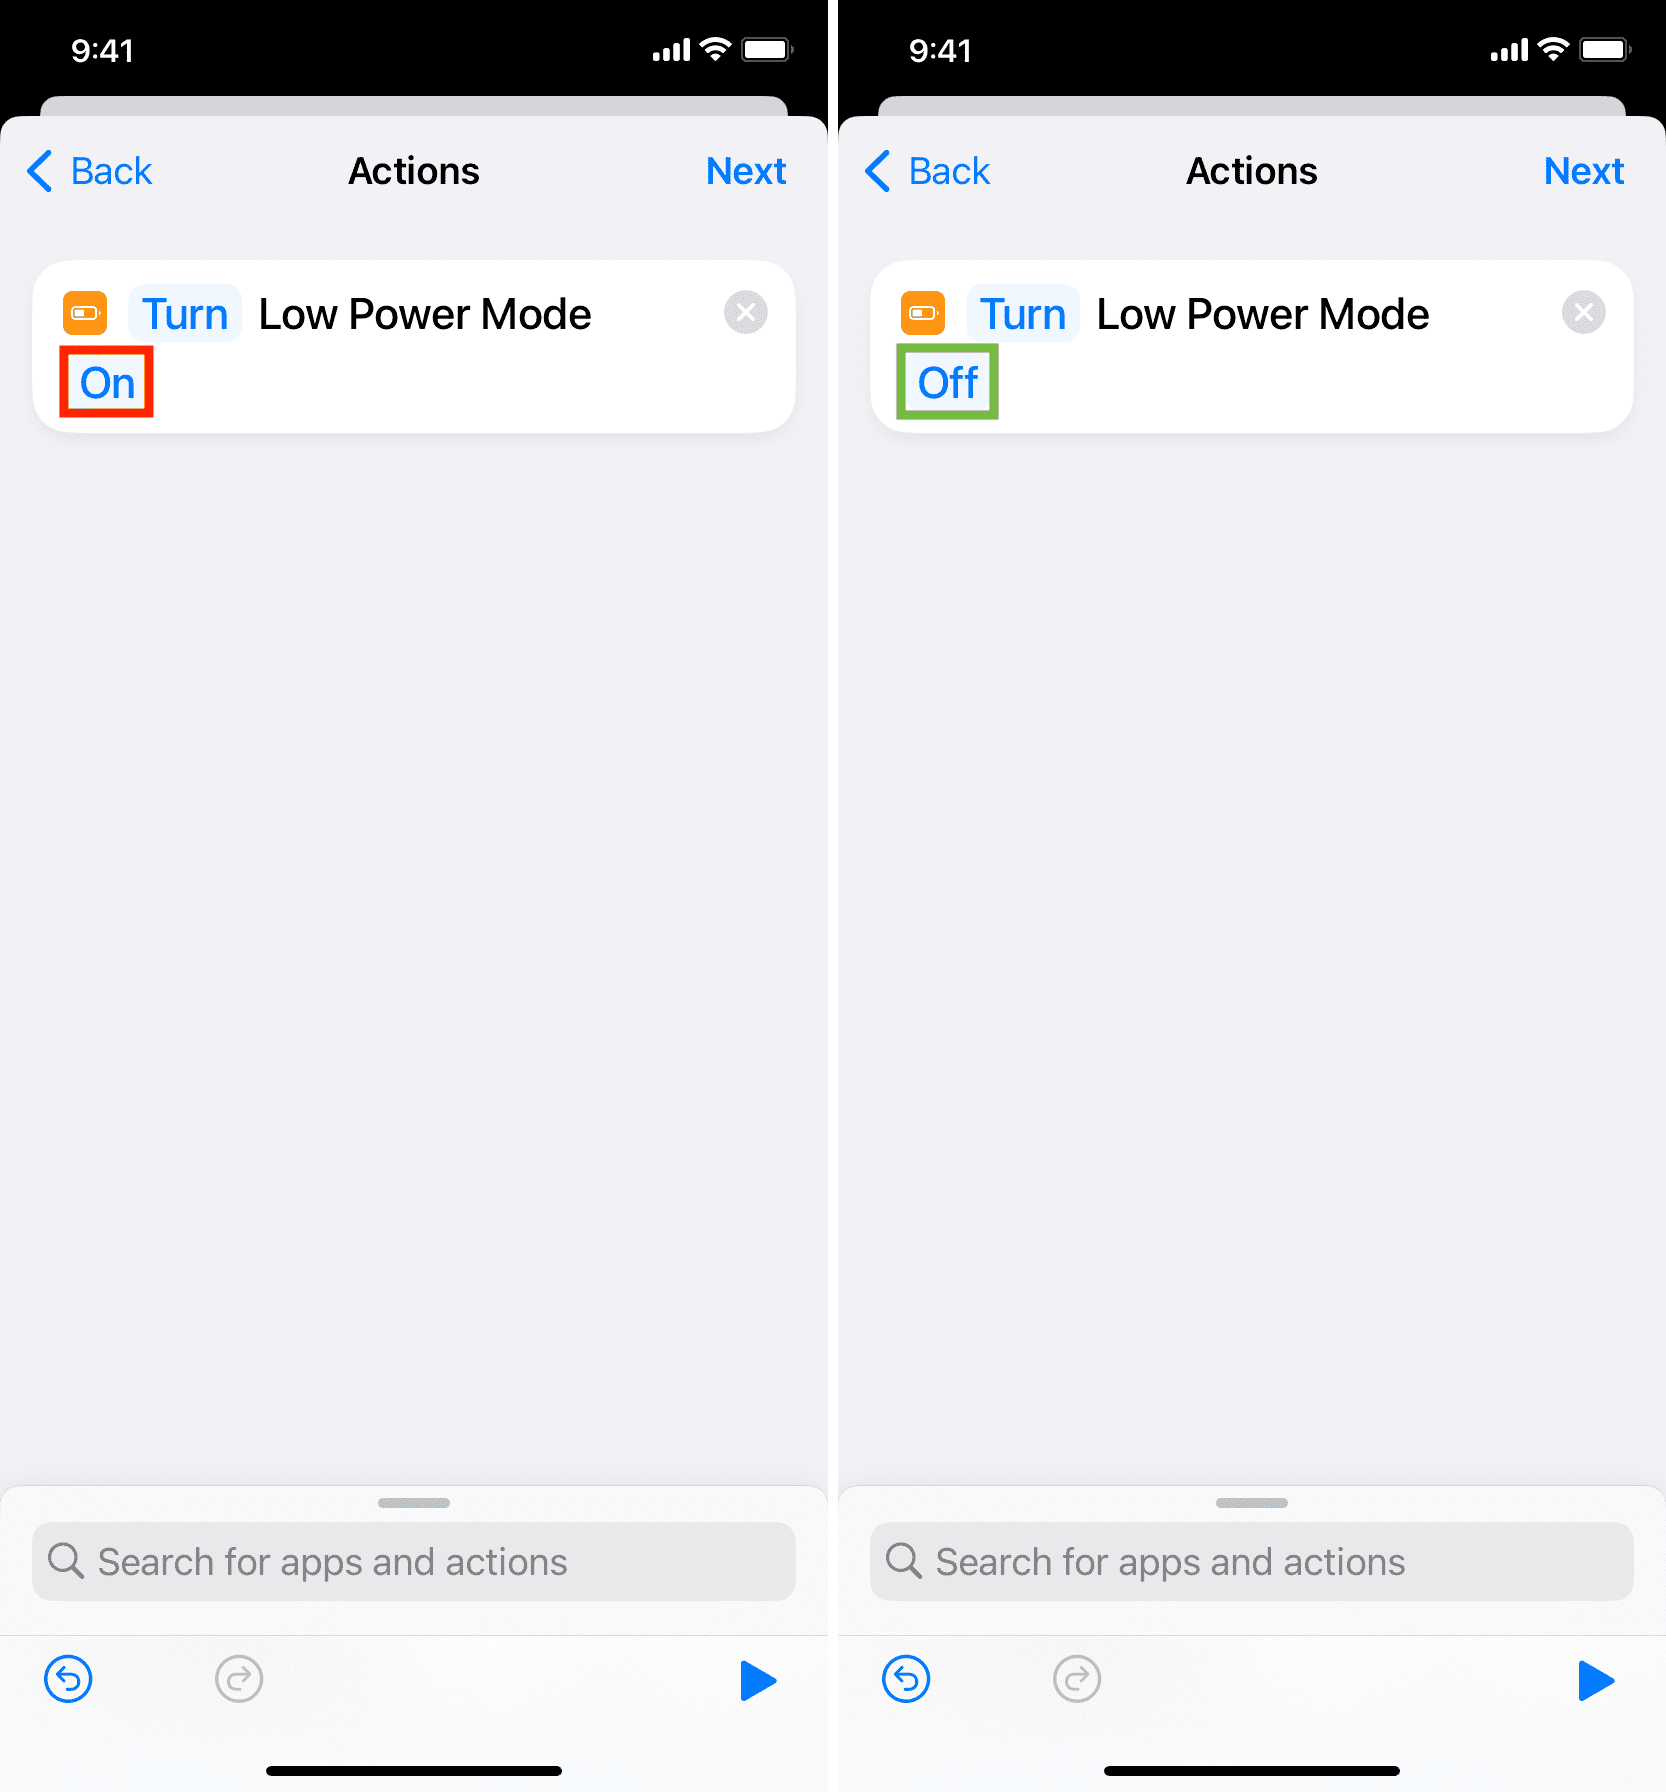 Turn Low Power Mode Off action